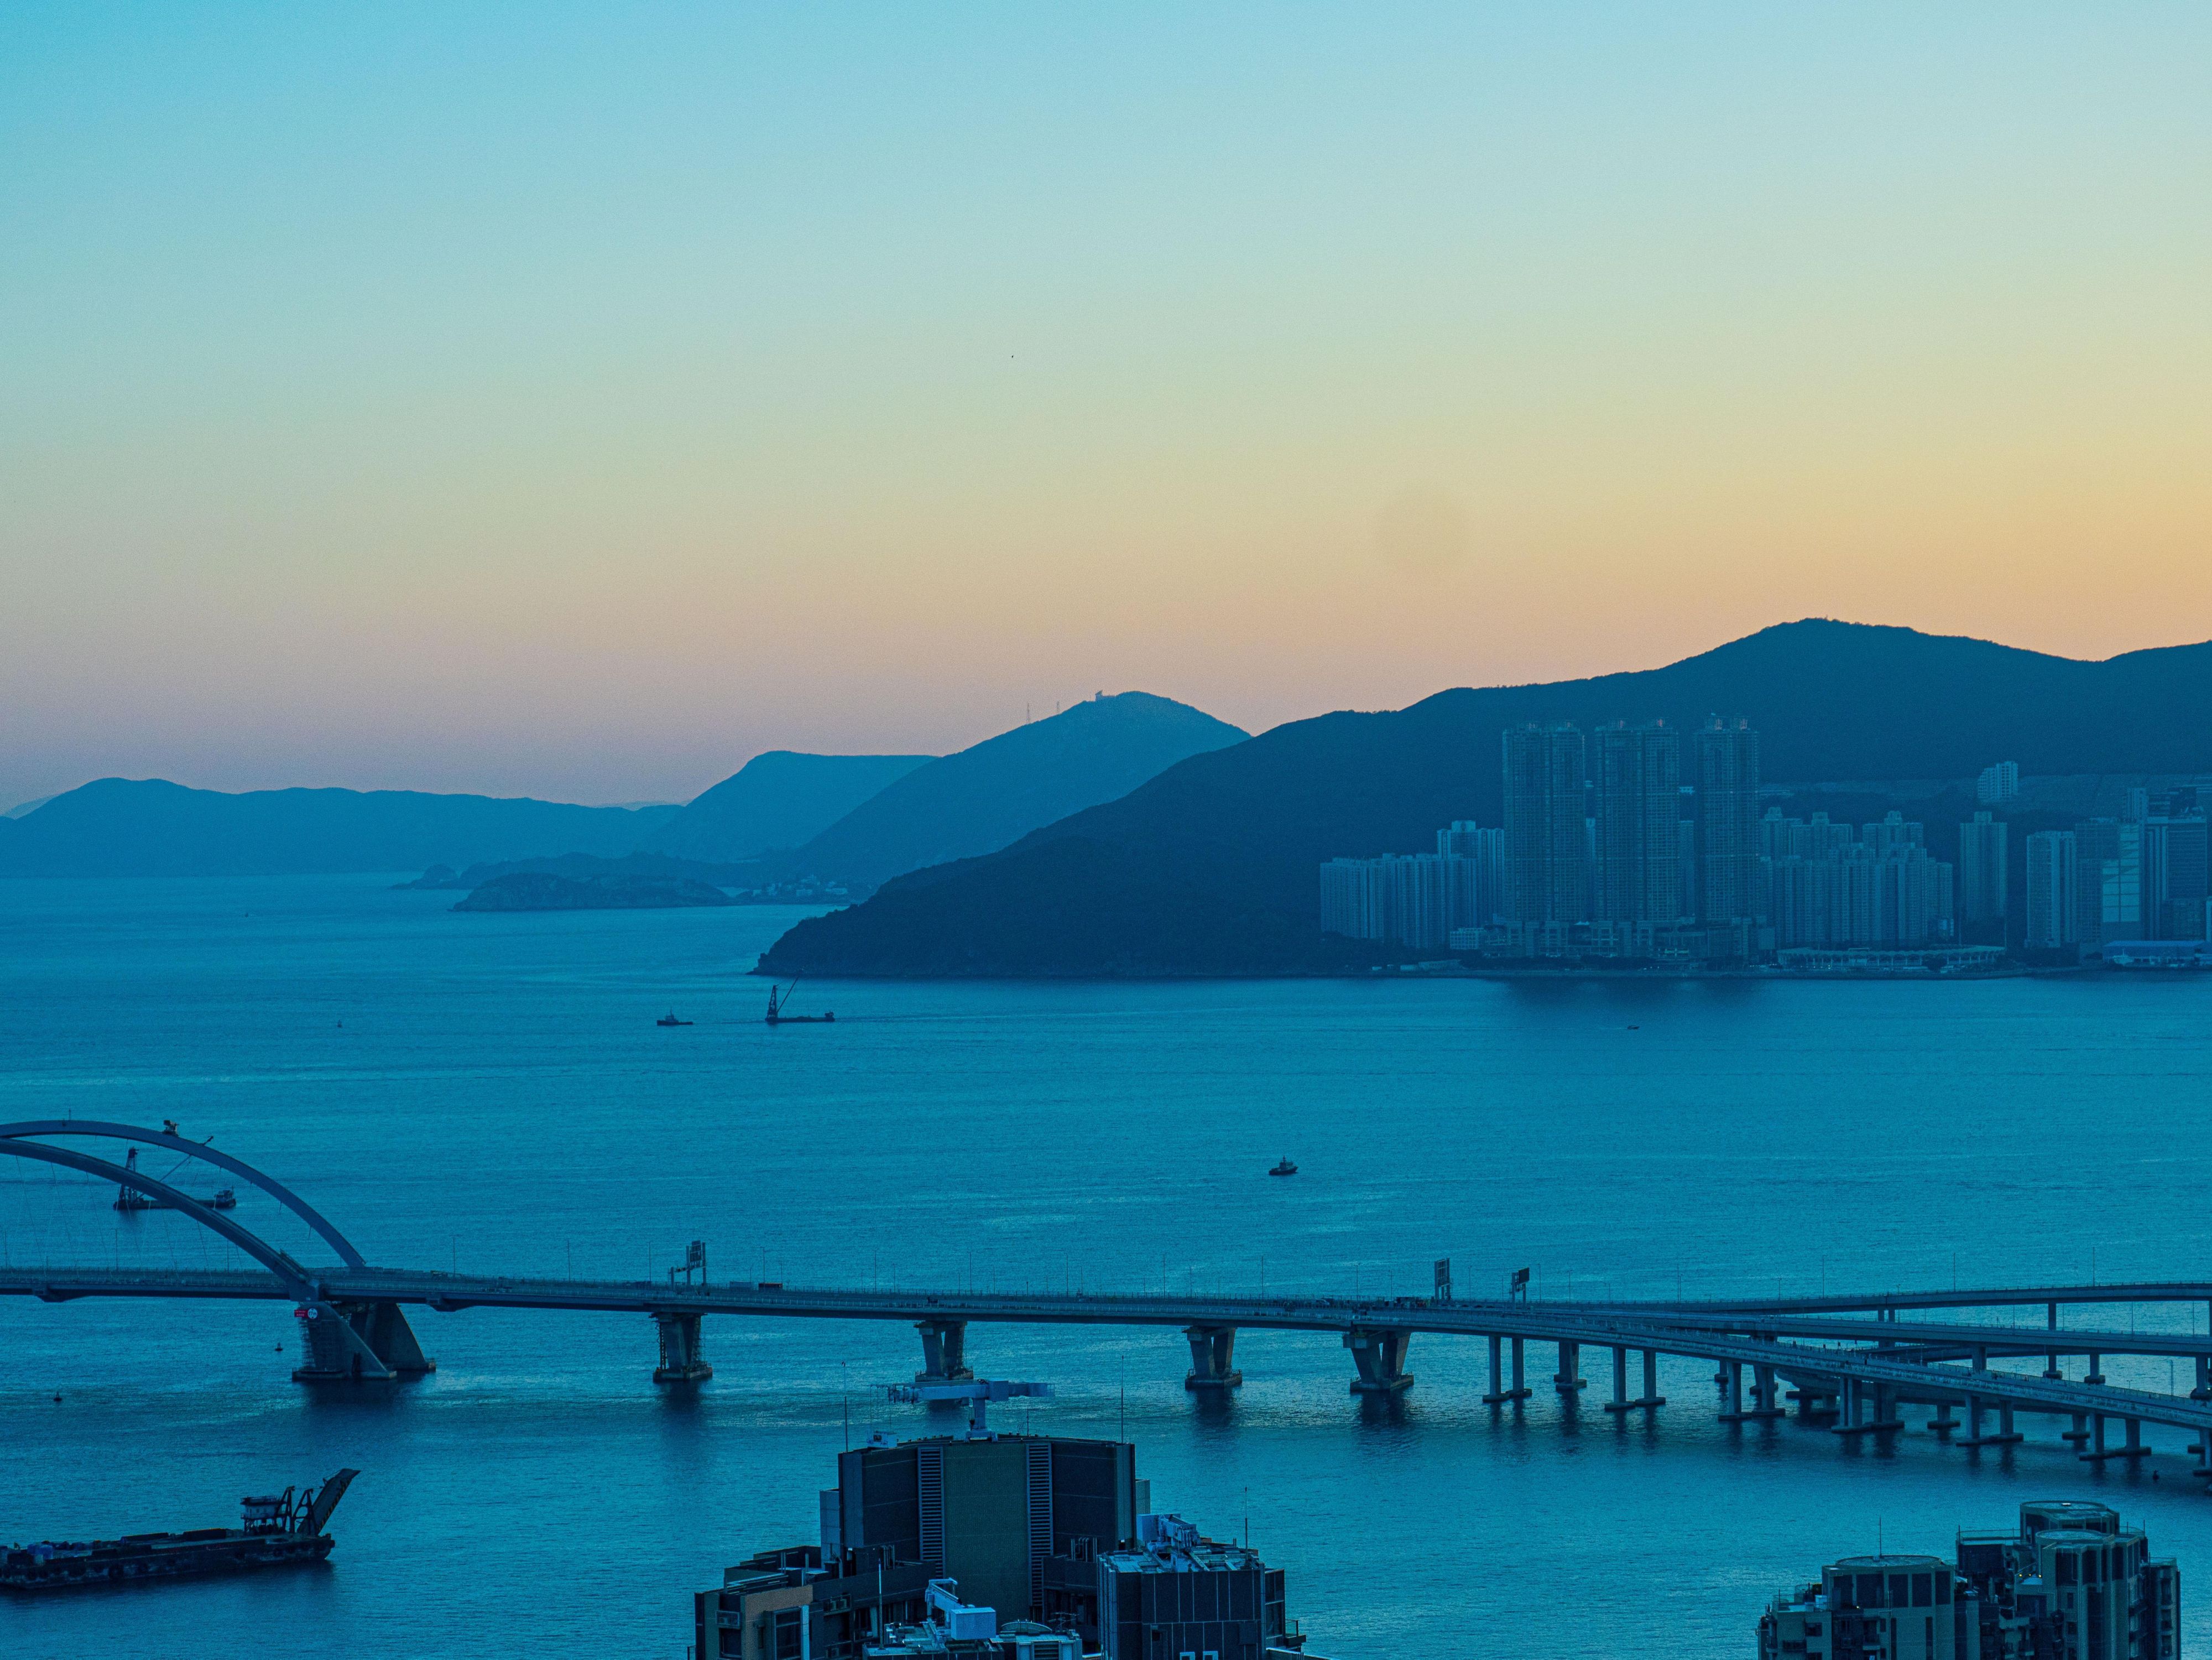 Crowne Plaza Hong Kong Kowloon East is located at the MTR Tseung Kwan O station Exit C. Cielo, top floor restaurant and bar where you can immerse yourself in the stunning mountain and sea views and experience the beauty and charm of Tseung Kwan O. Please Come and Feel it!